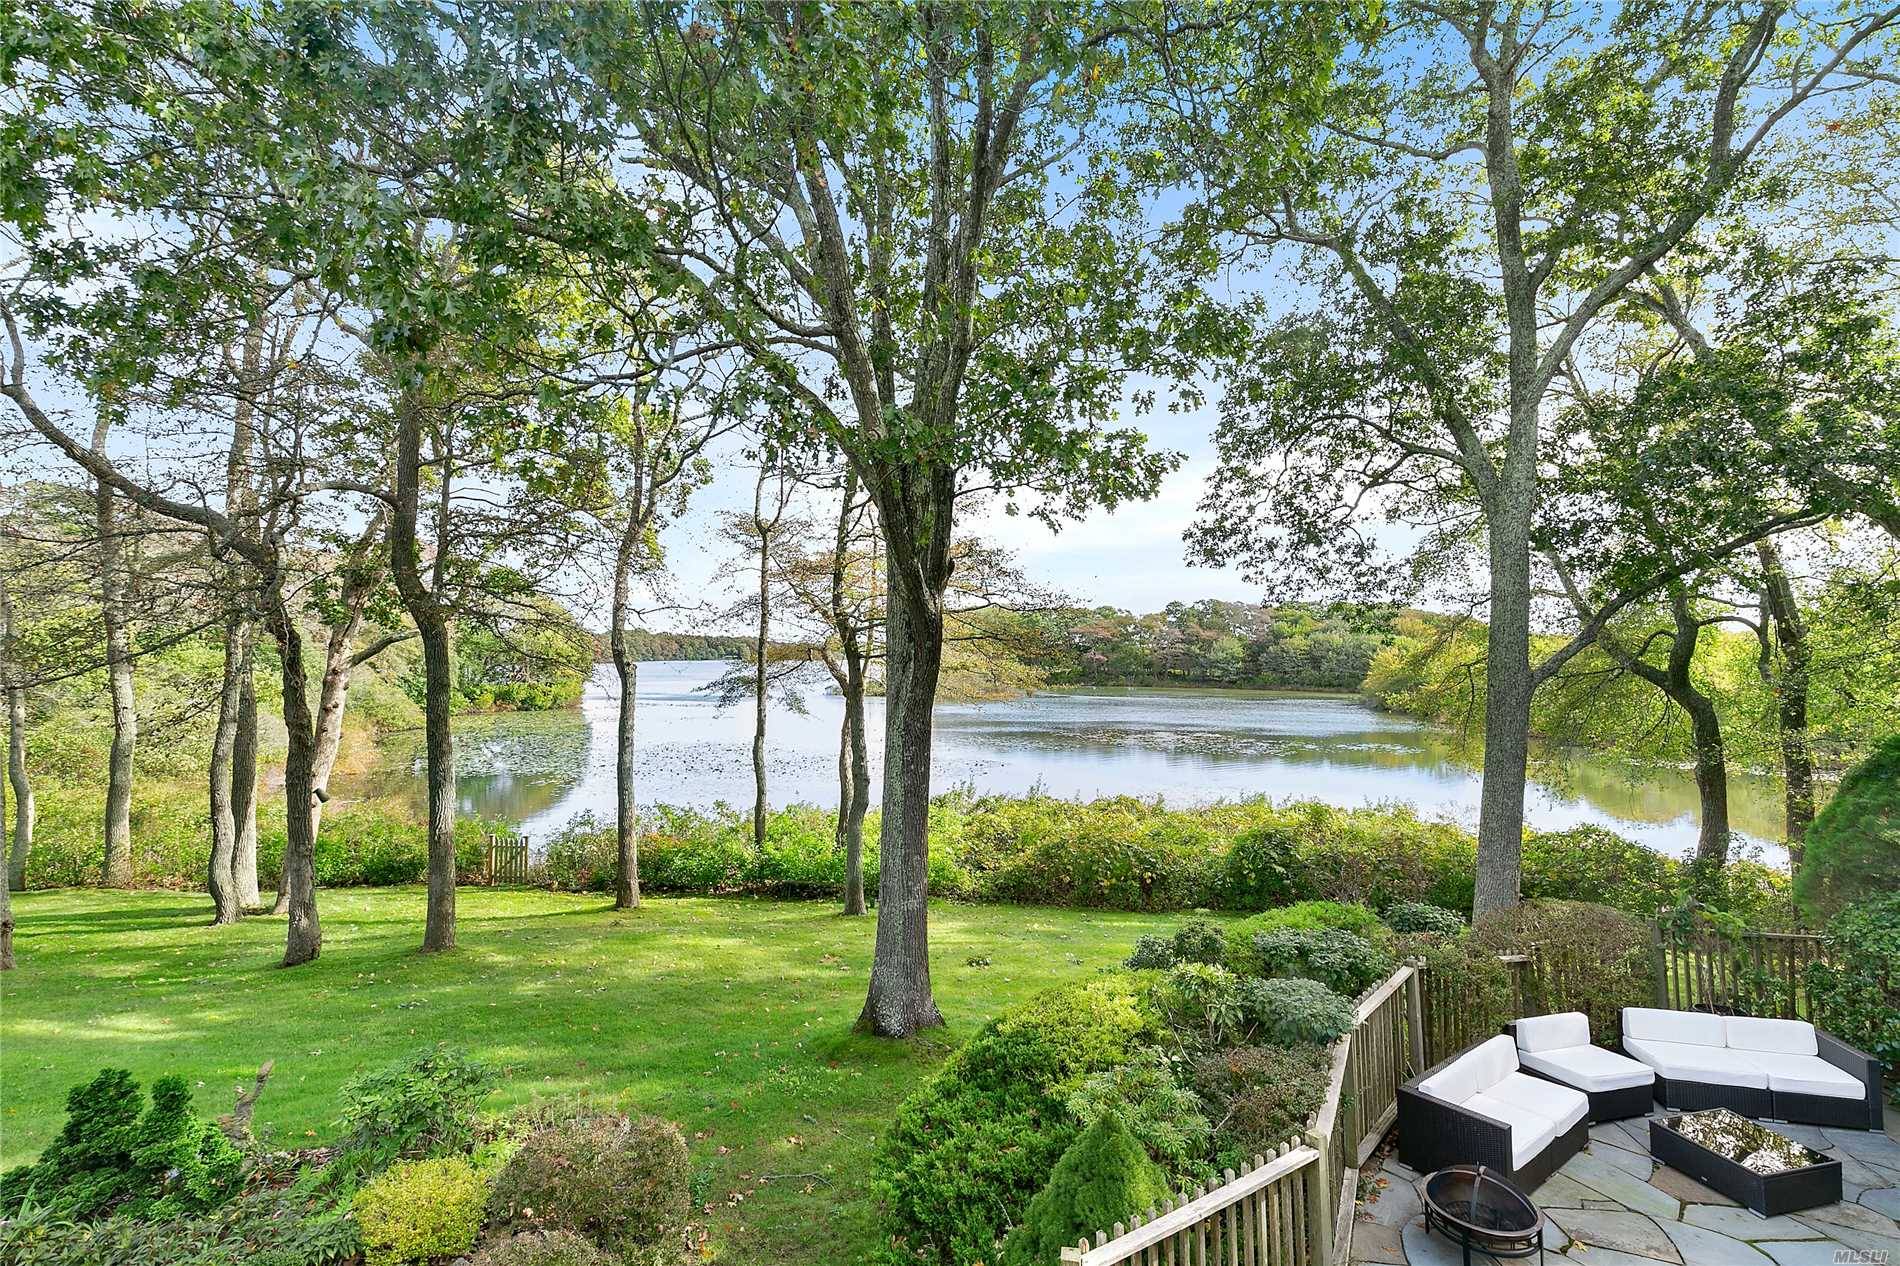 Stunning Estate On An Acre Centered Right On Mill Pond Formerly Lake Nowedonah.